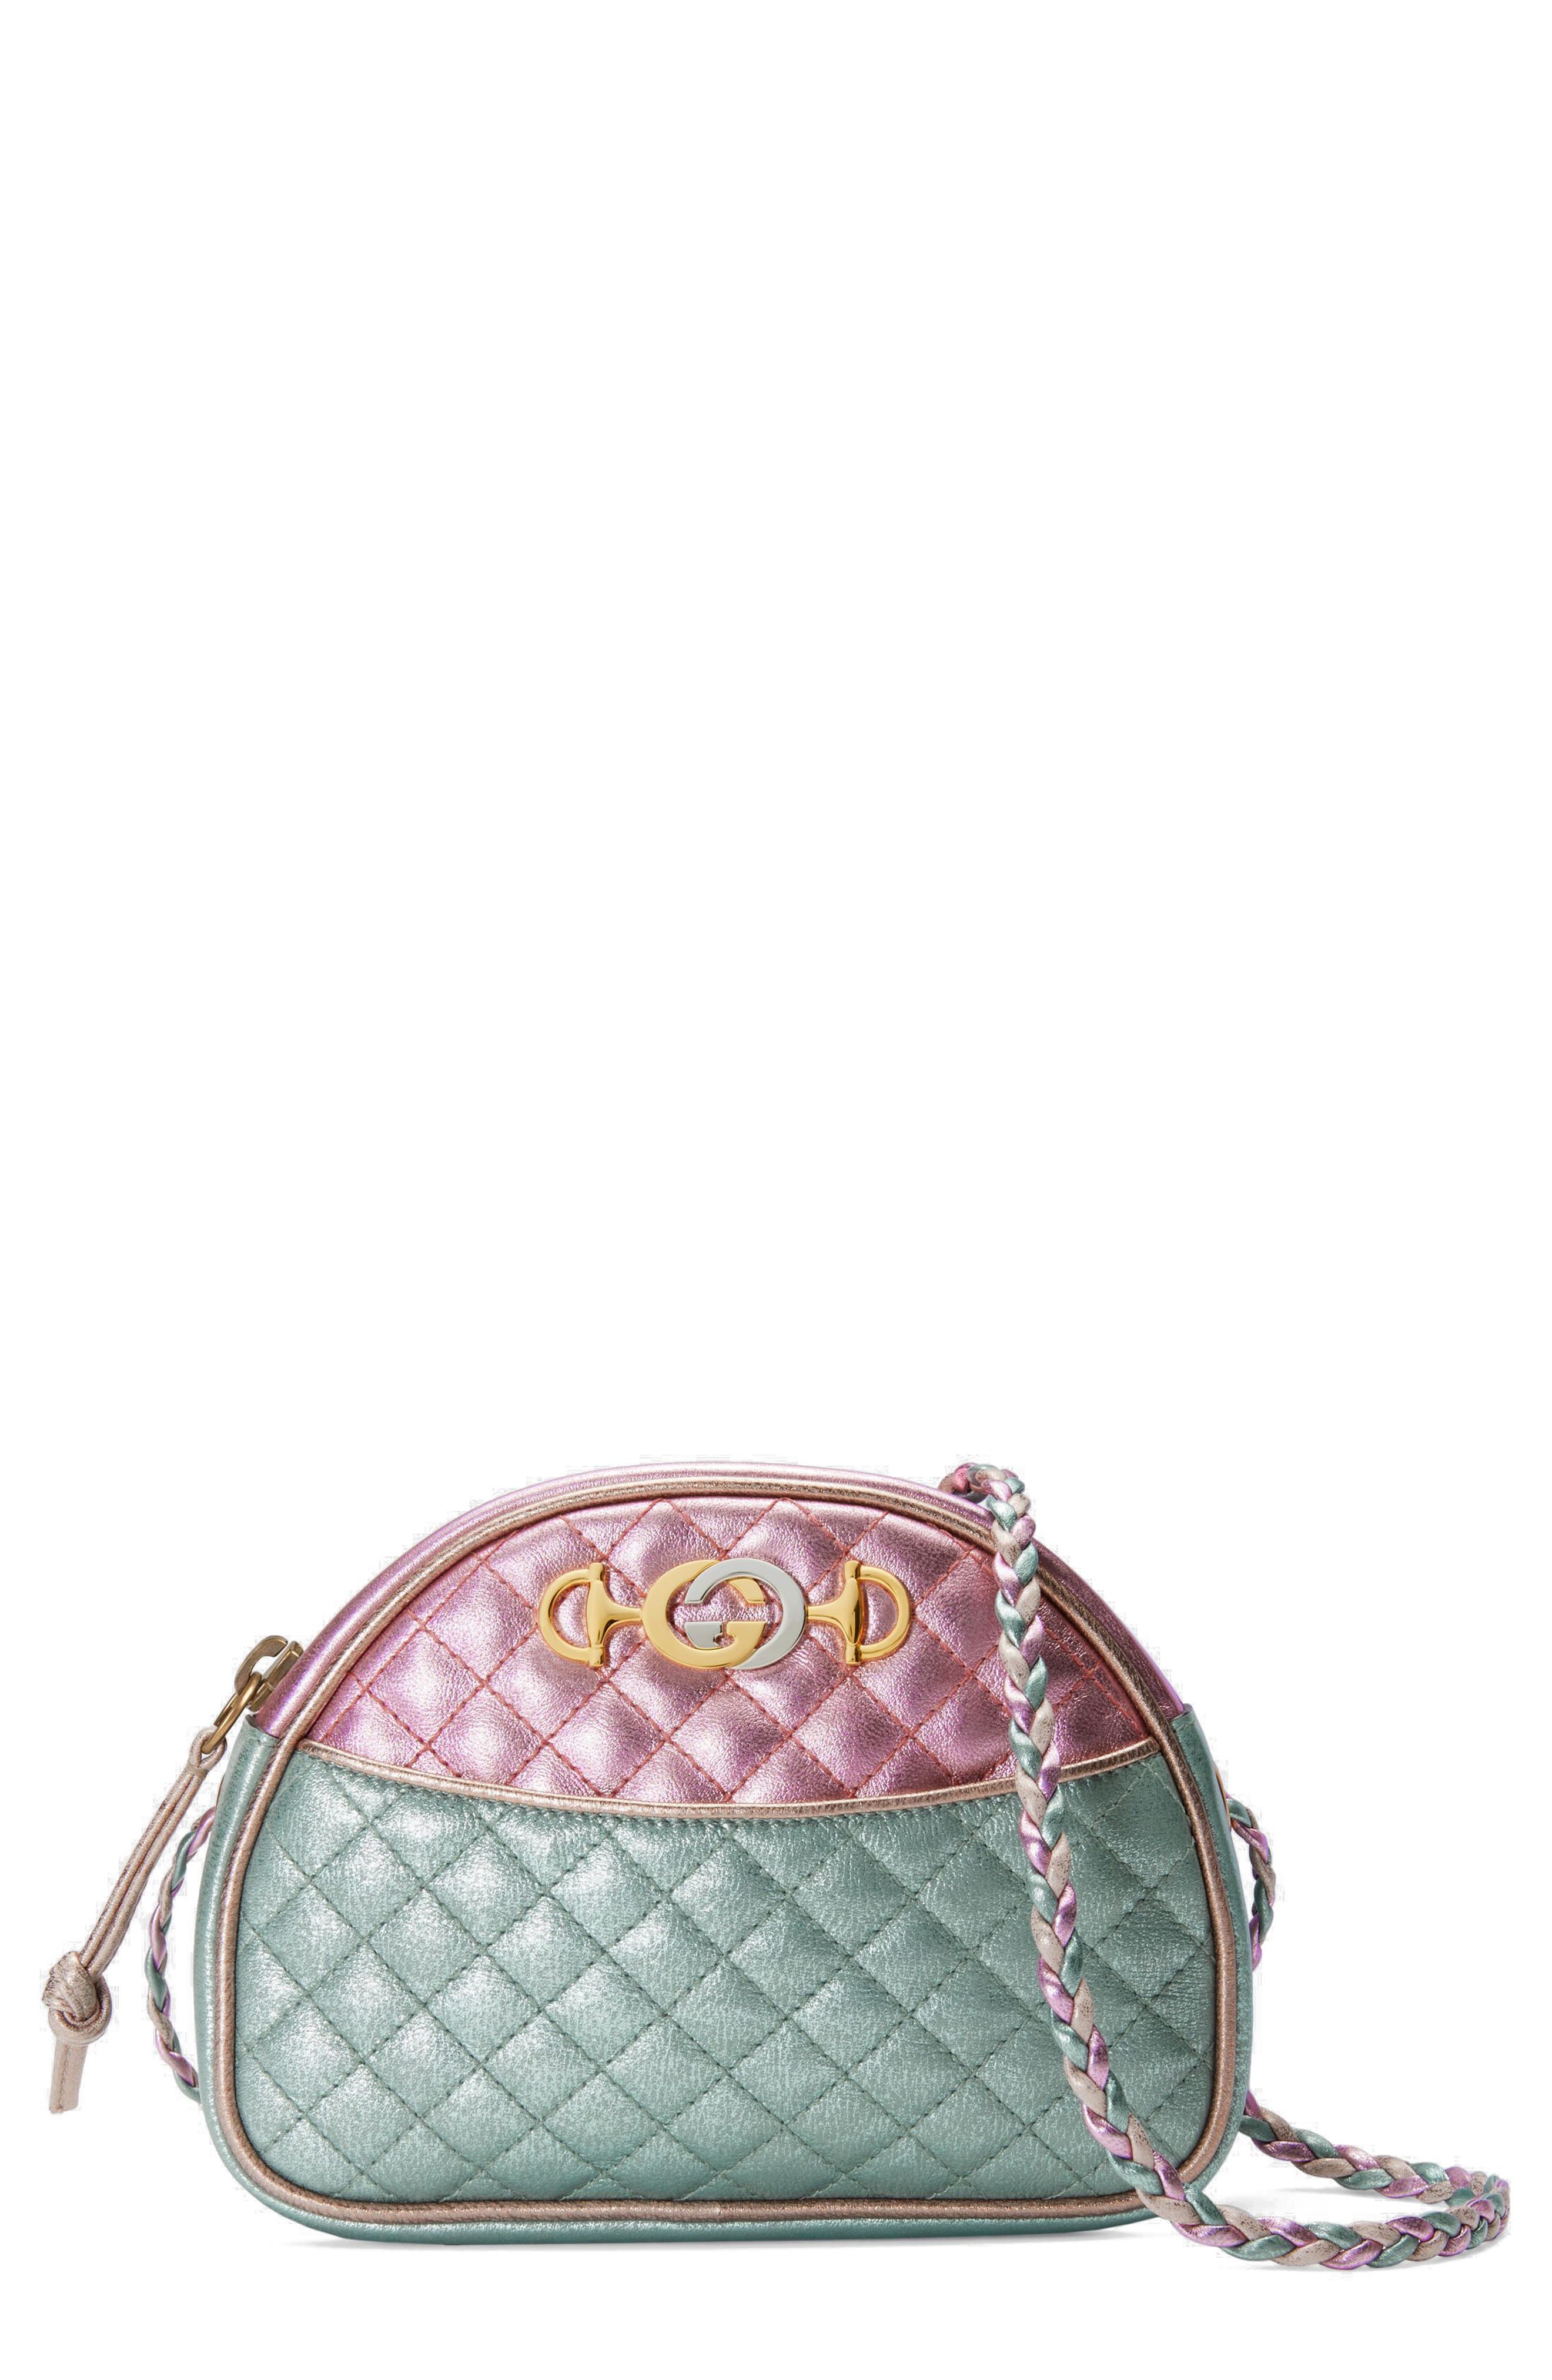 Gucci Quilted Metallic Dome Crossbody 